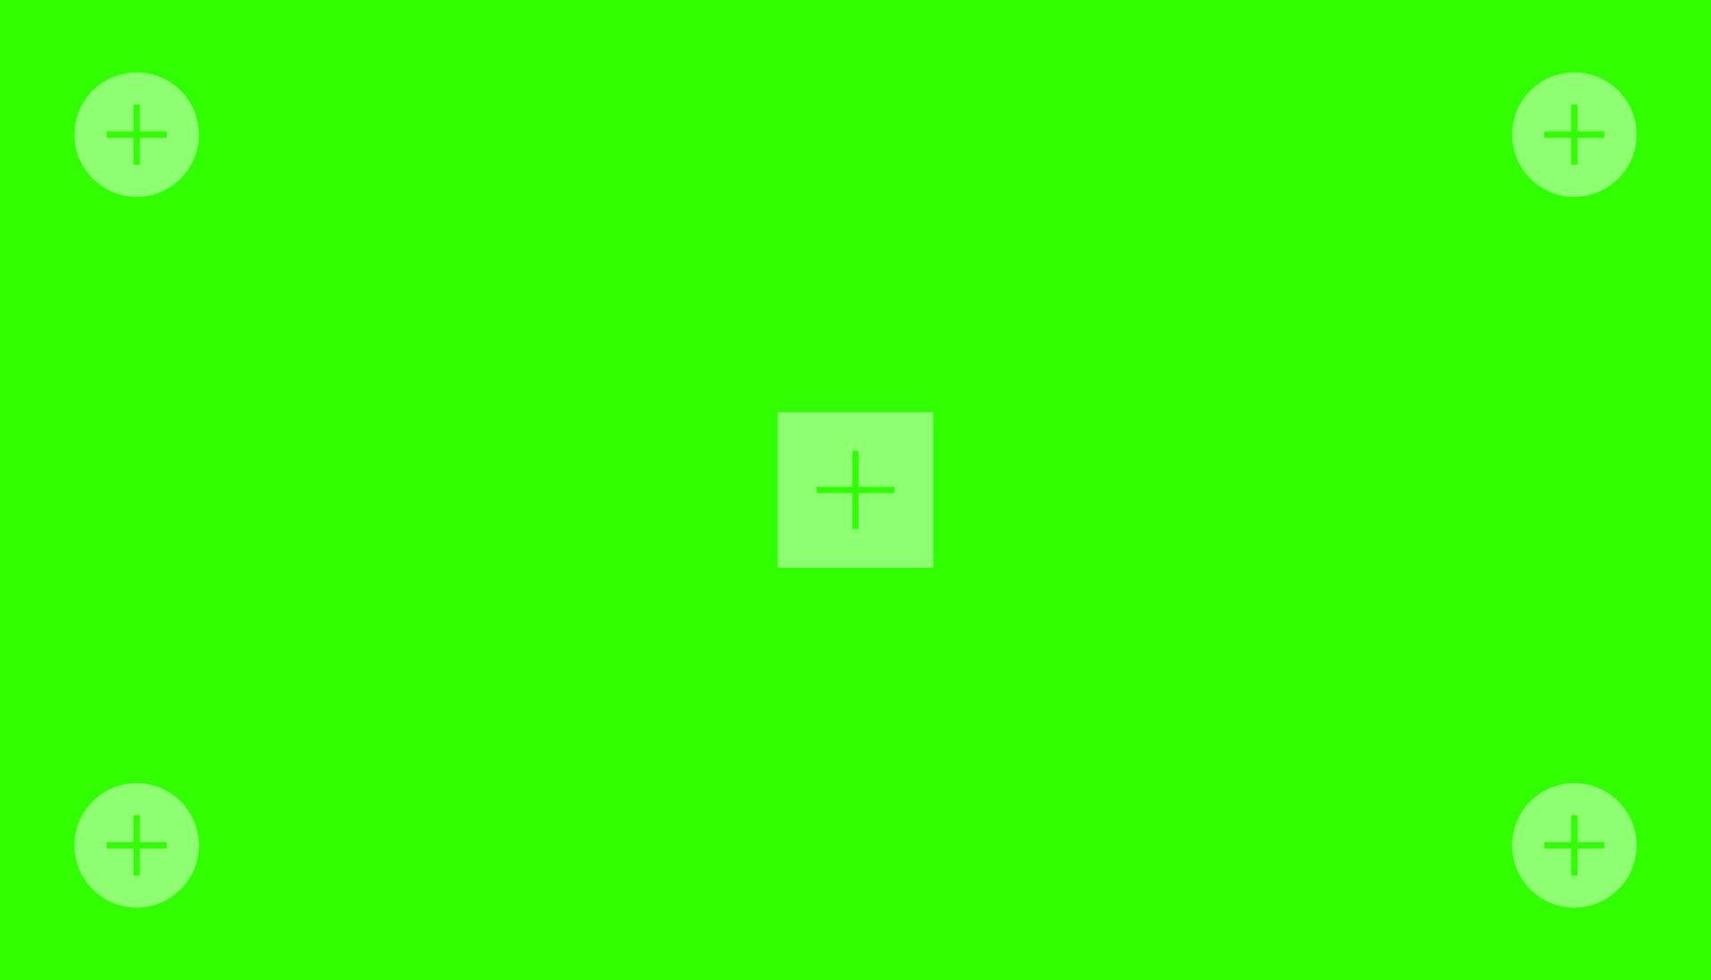 Green colored chroma key background screen flat style design vector illustration.